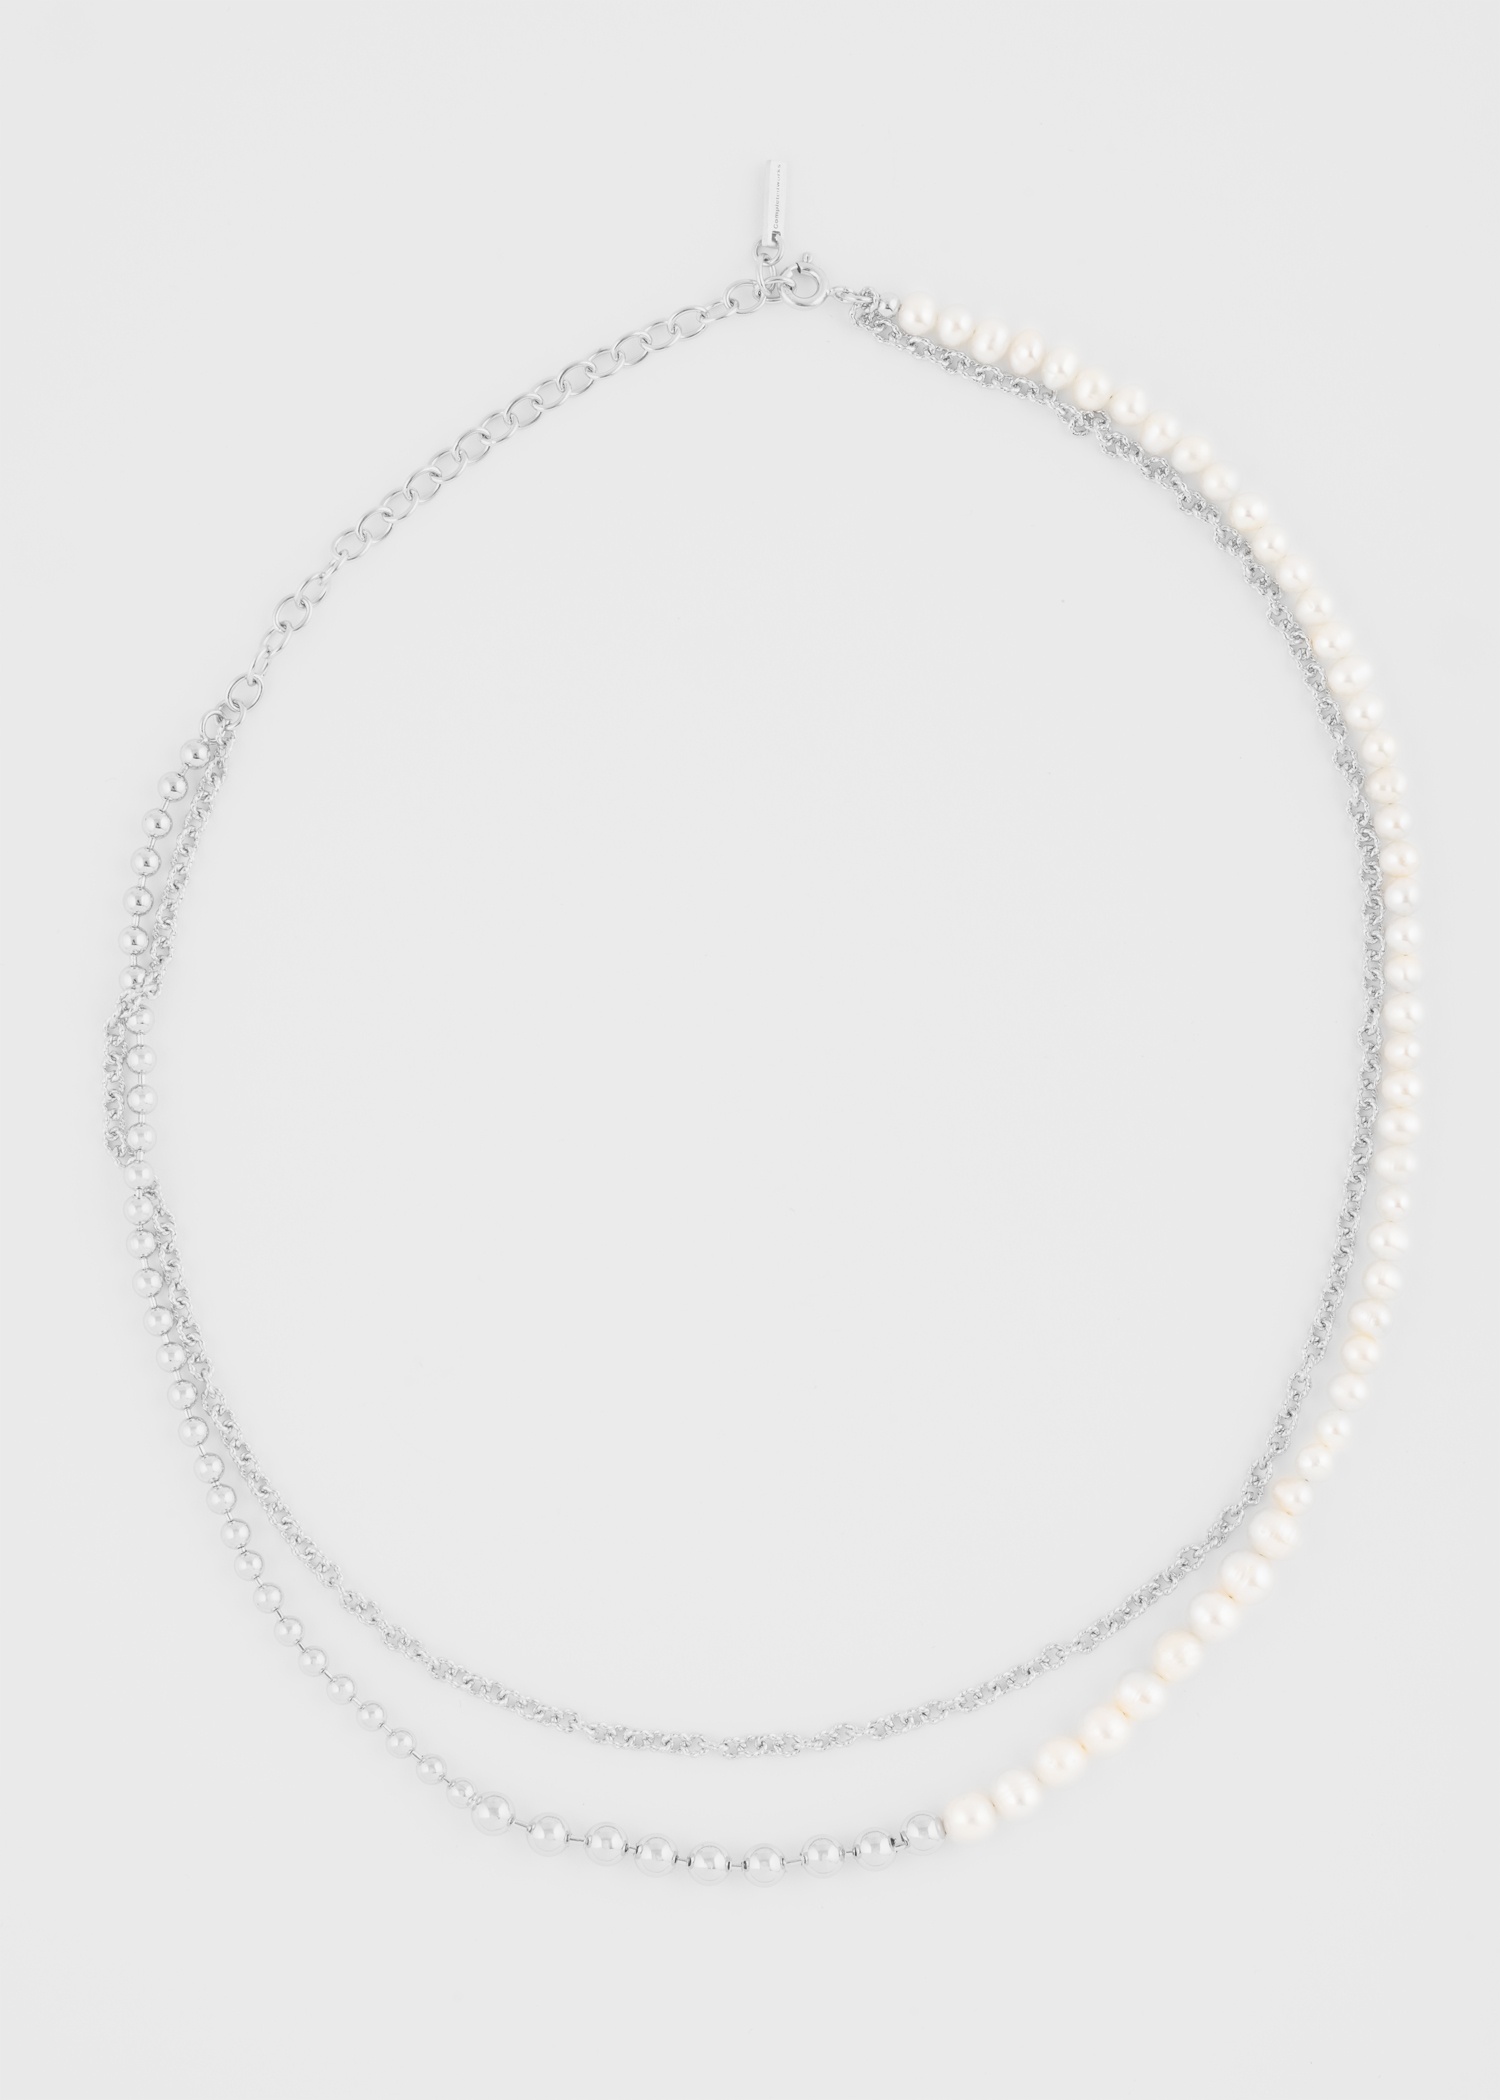 'Forgotten Seas' Pearl & Sterling Silver Double-Chain Necklace by Completedworks - 3